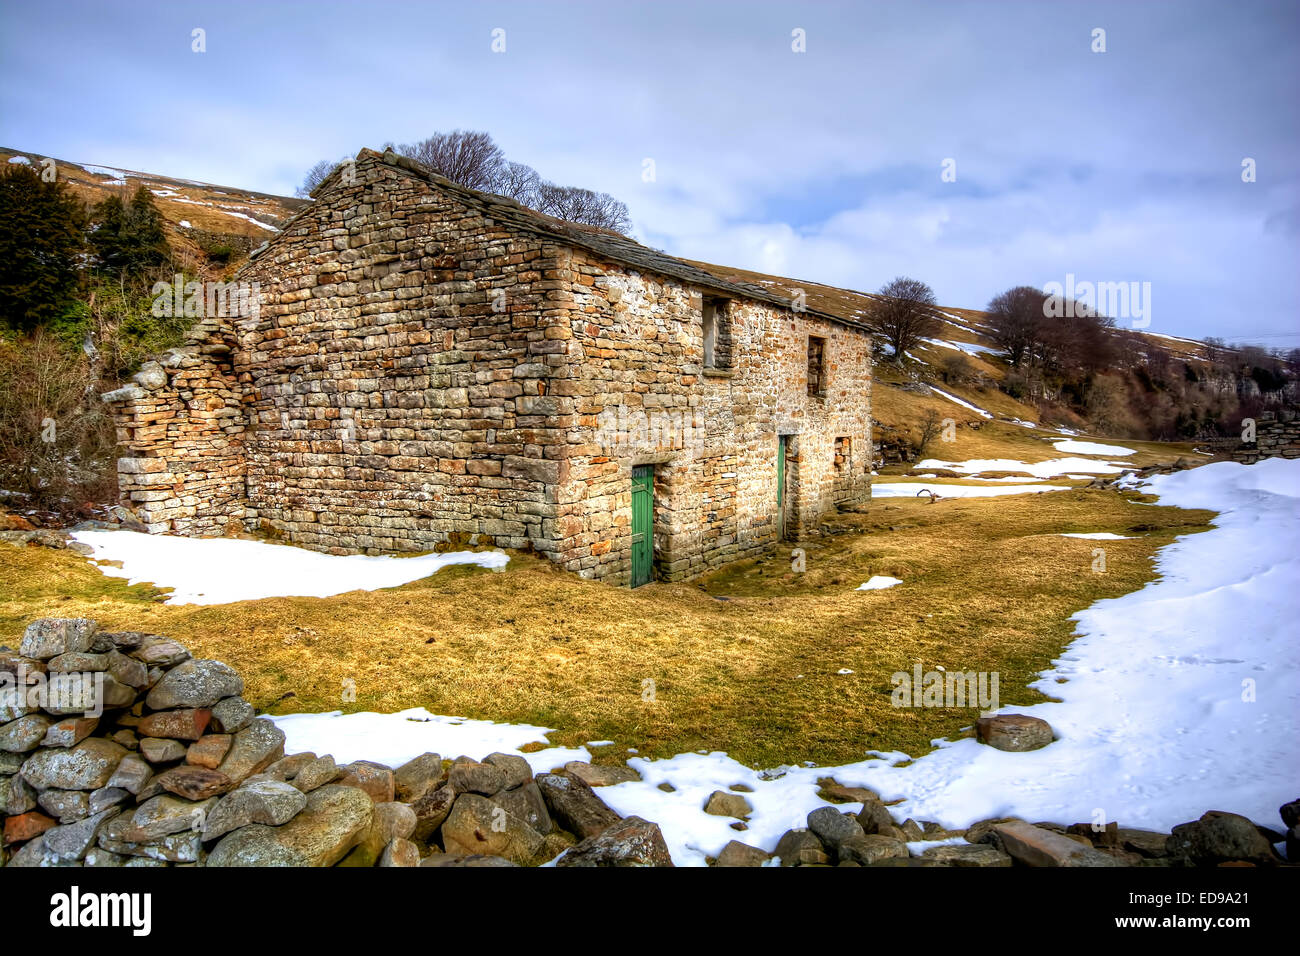 An all to familiar scene in Swaledale is the barns scattered across the landscape. This one can be found 2 miles from Keld in th Stock Photo